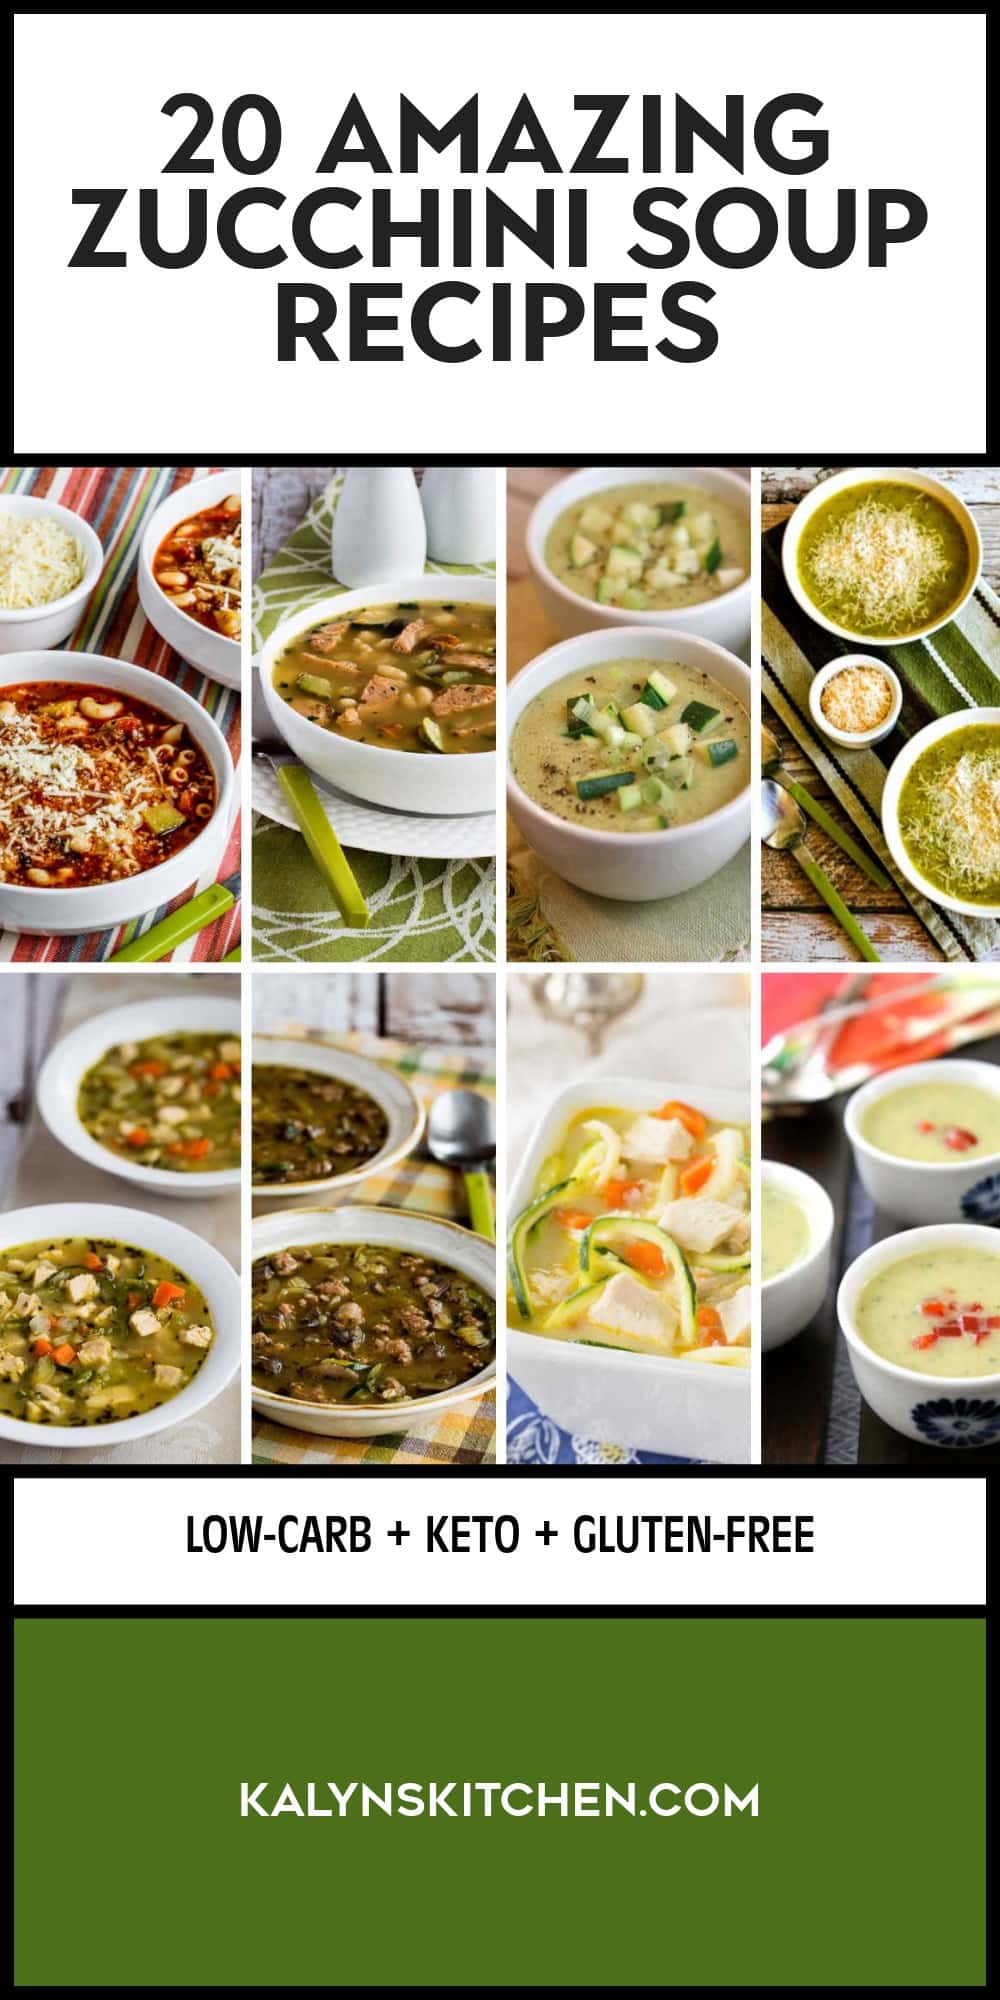 Pinterest image for 20 Amazing Zucchini Soup Recipes collage of featured recipes.